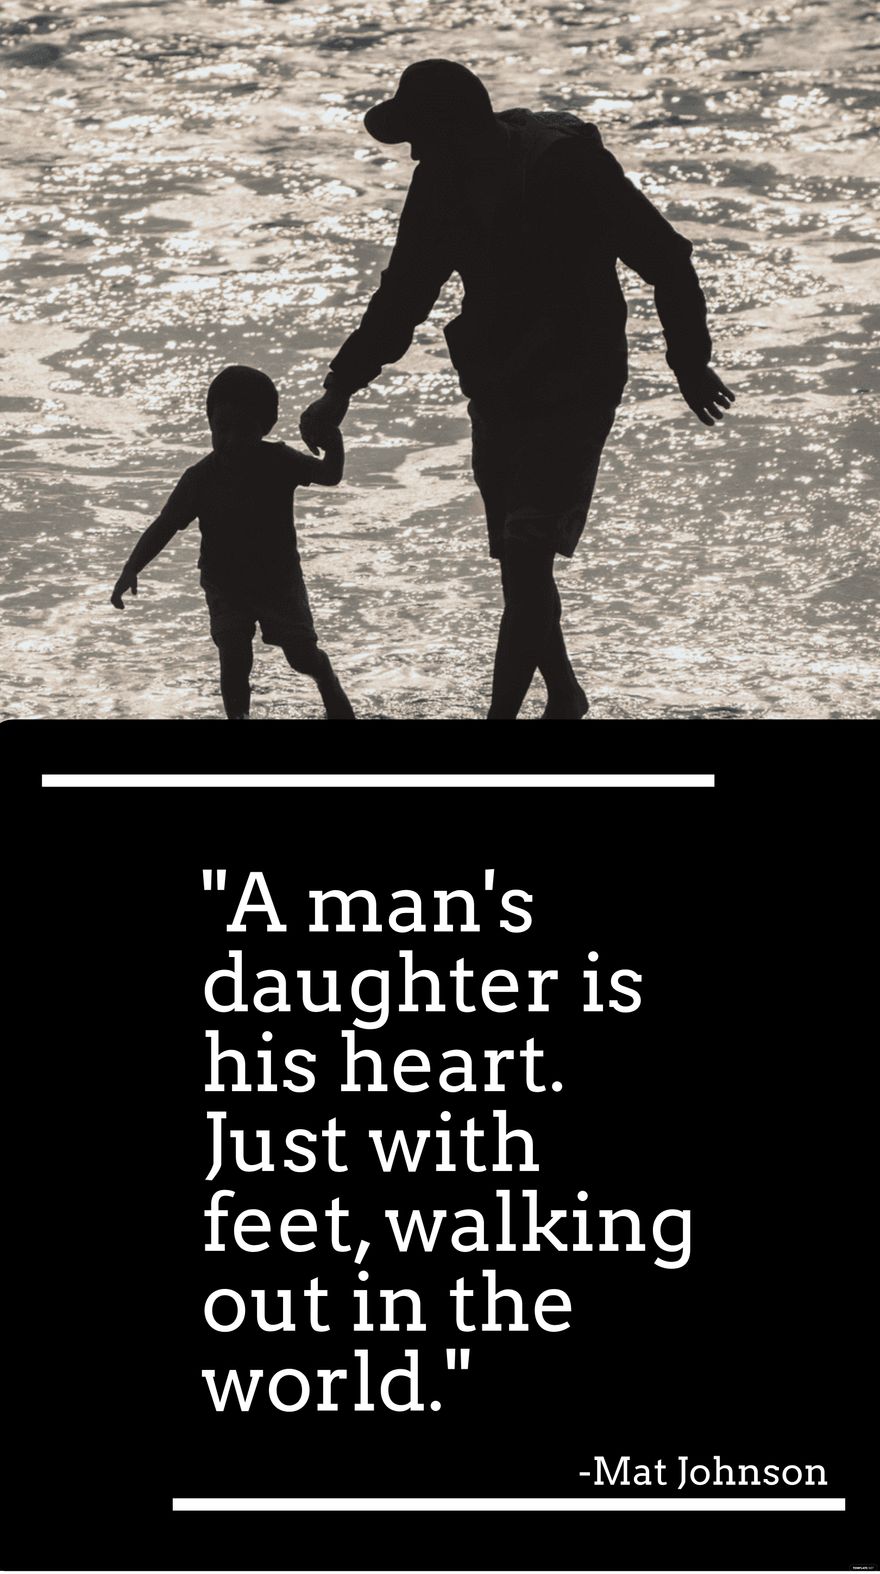 Mat Johnson - "A man's daughter is his heart. Just with feet, walking out in the world." 